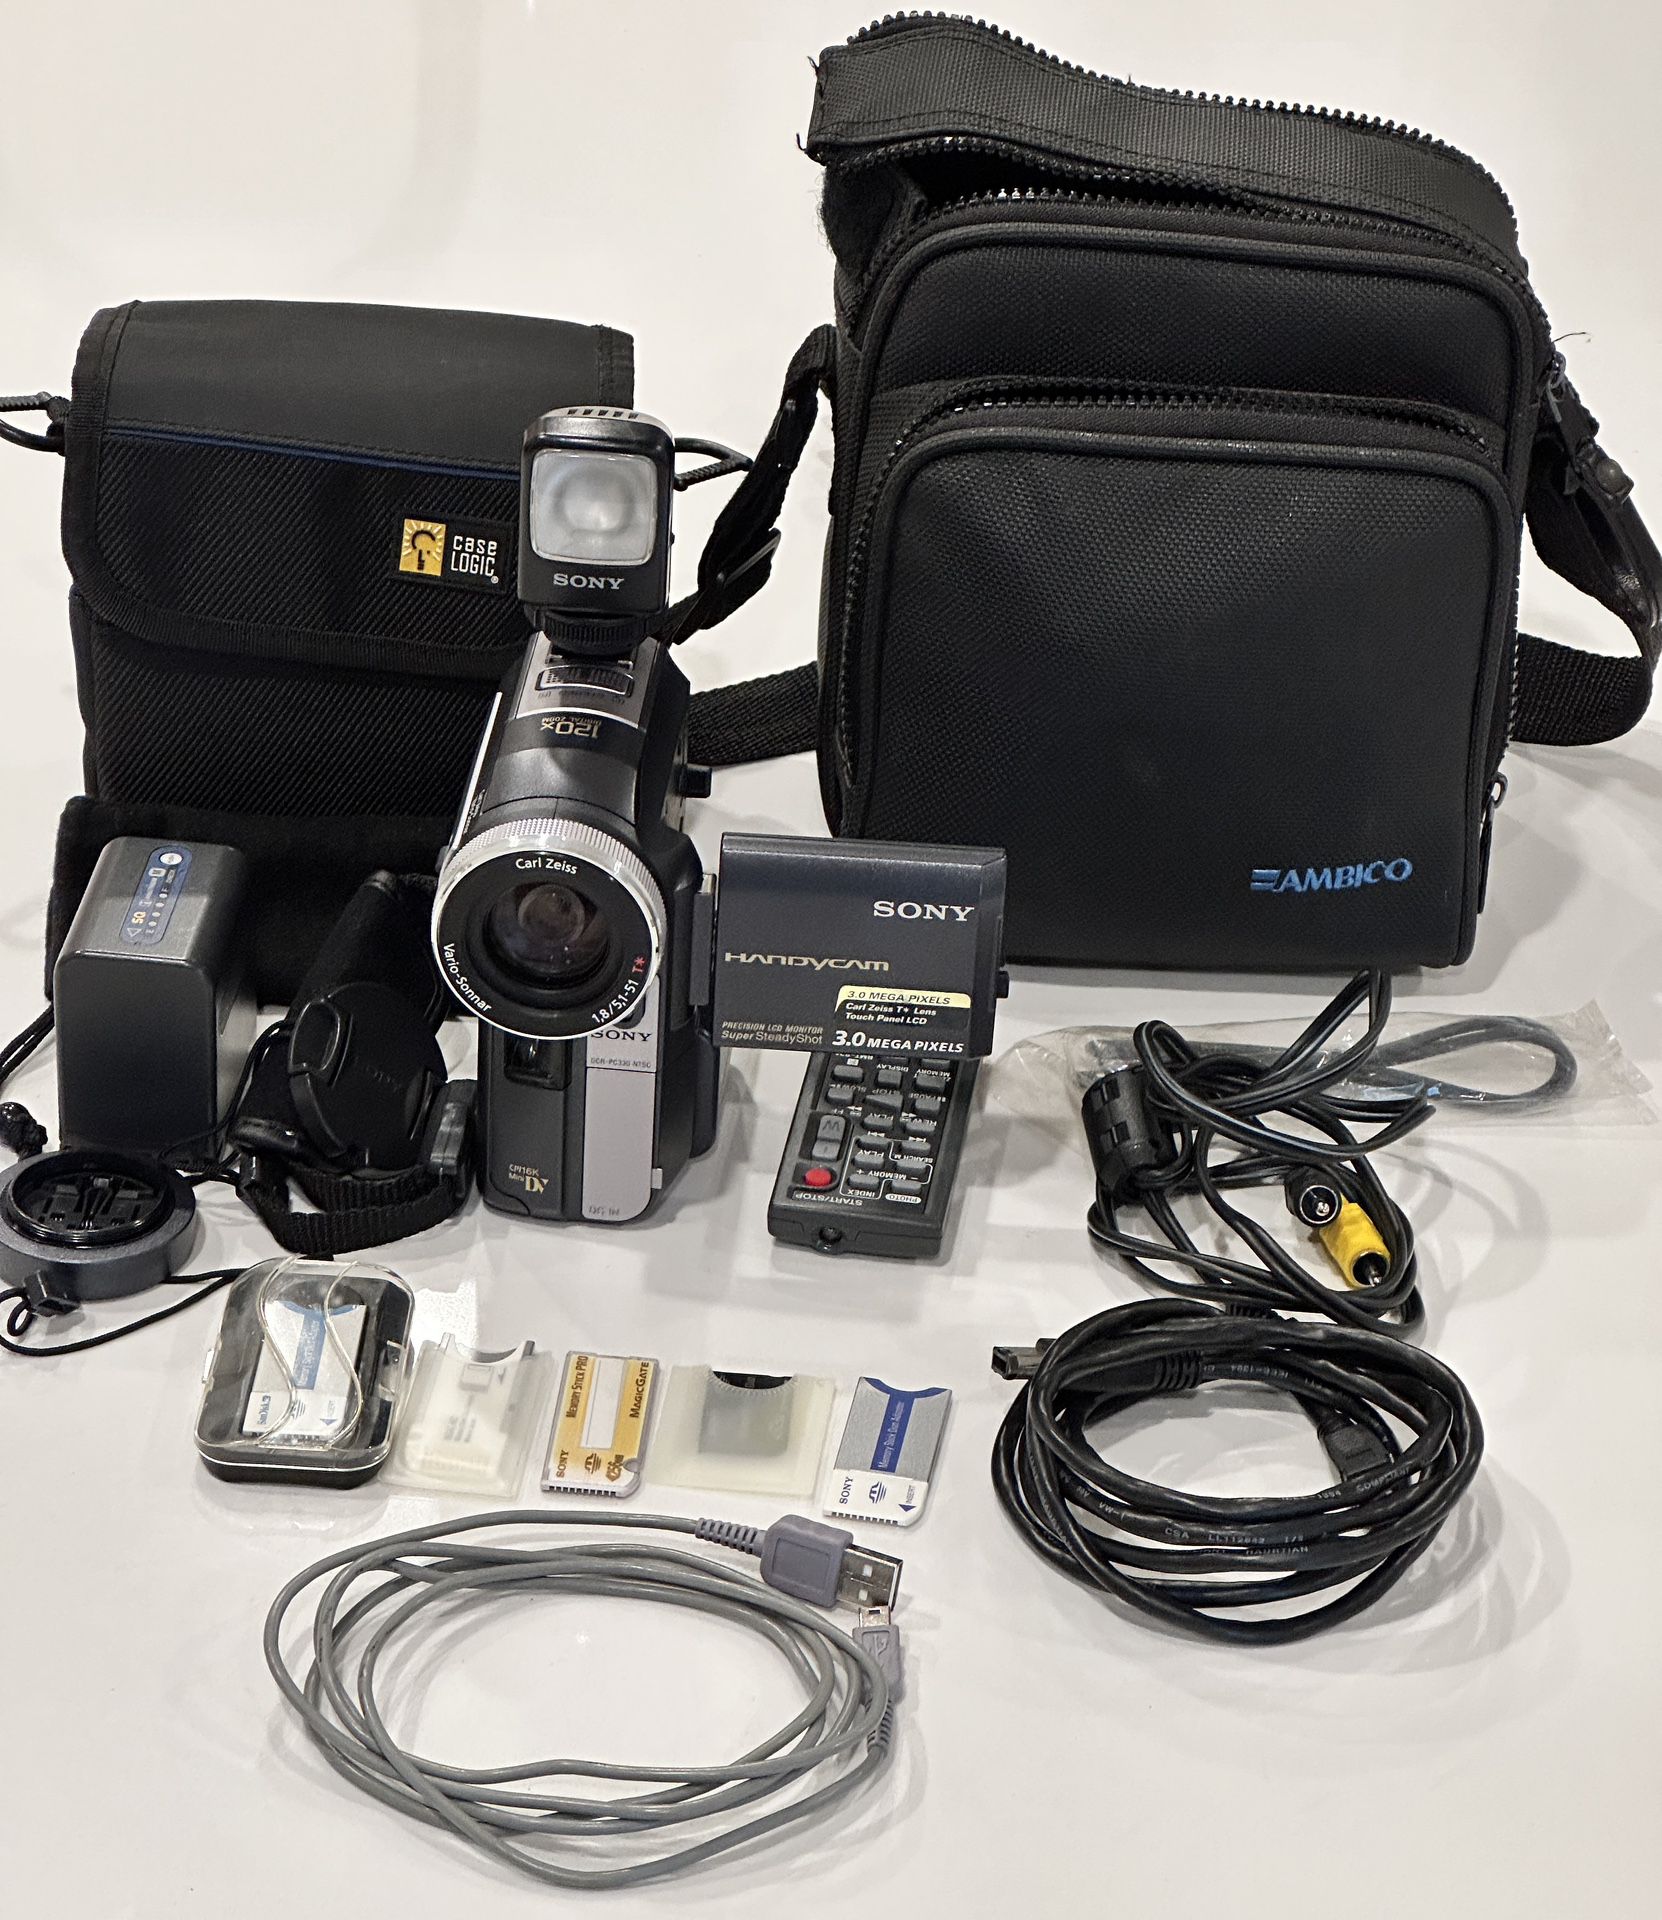 Sony Handycam DCR-PC330 With All It’s Goodies.